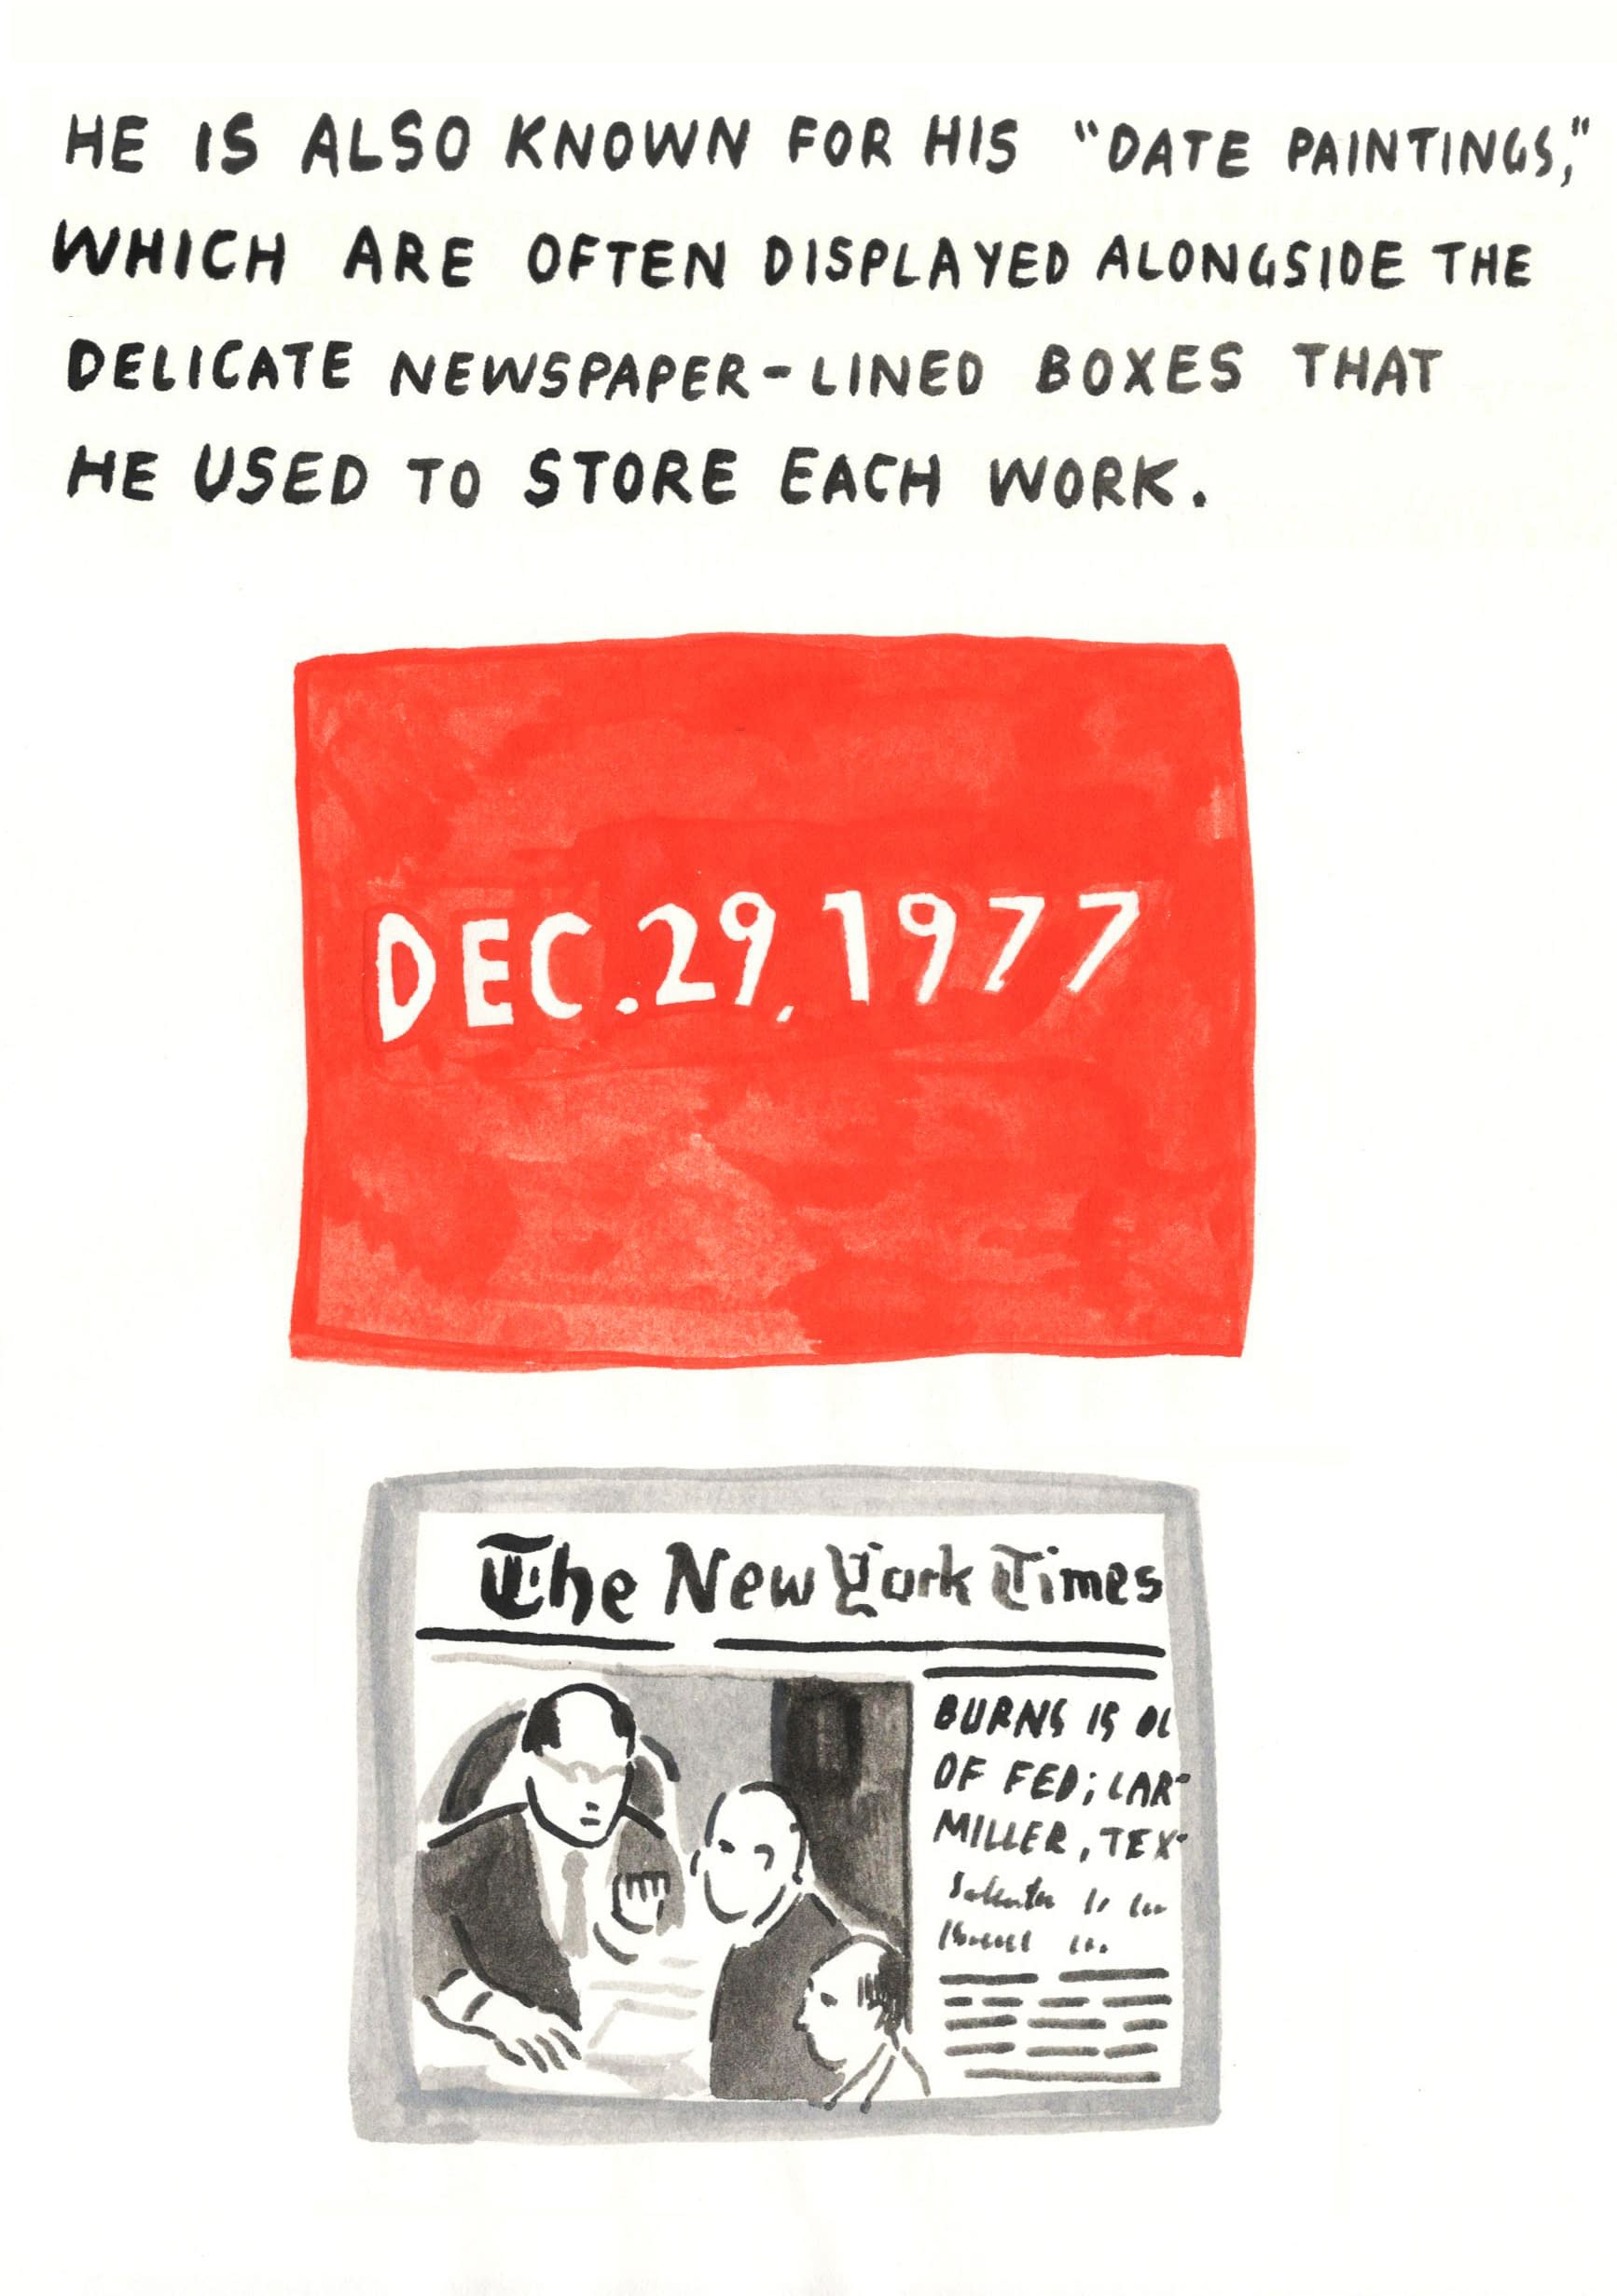 The text reads: “He is also known for his ‘date paintings,’ which are often displayed alongside the delicate newspaper-lined boxes that he used to store each work.” Below this is a reproduction of Kawara’s date painting for December 29, 1977. The canvas is painted all red and the date is written in big characters. The accompanying box is lined with the front page from that day’s New York Times.